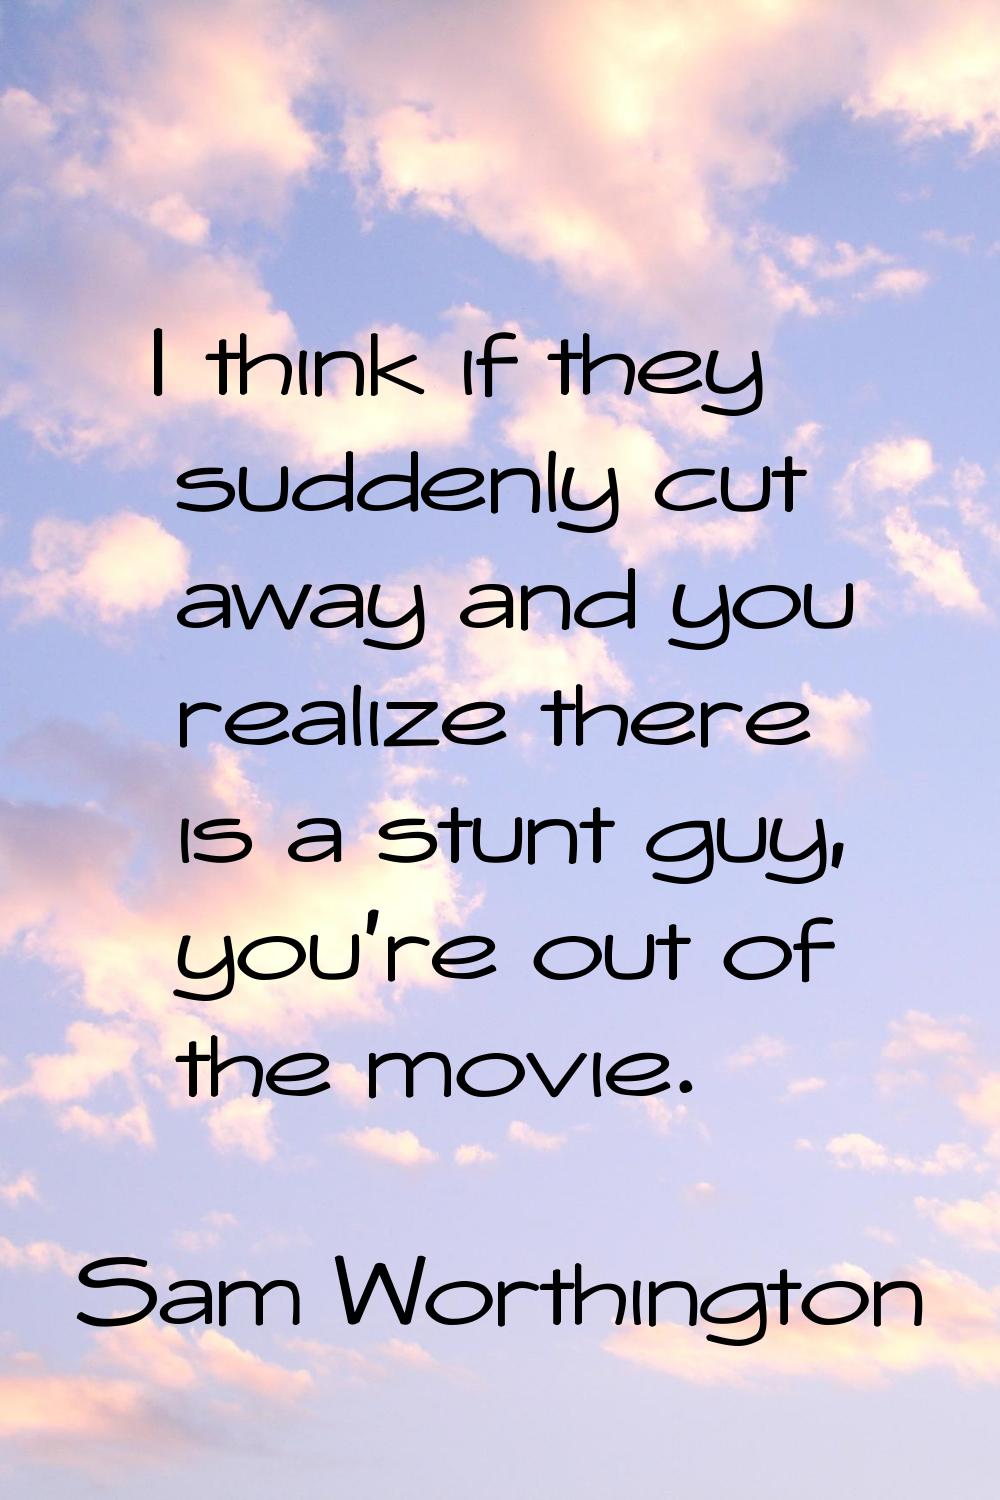 I think if they suddenly cut away and you realize there is a stunt guy, you're out of the movie.